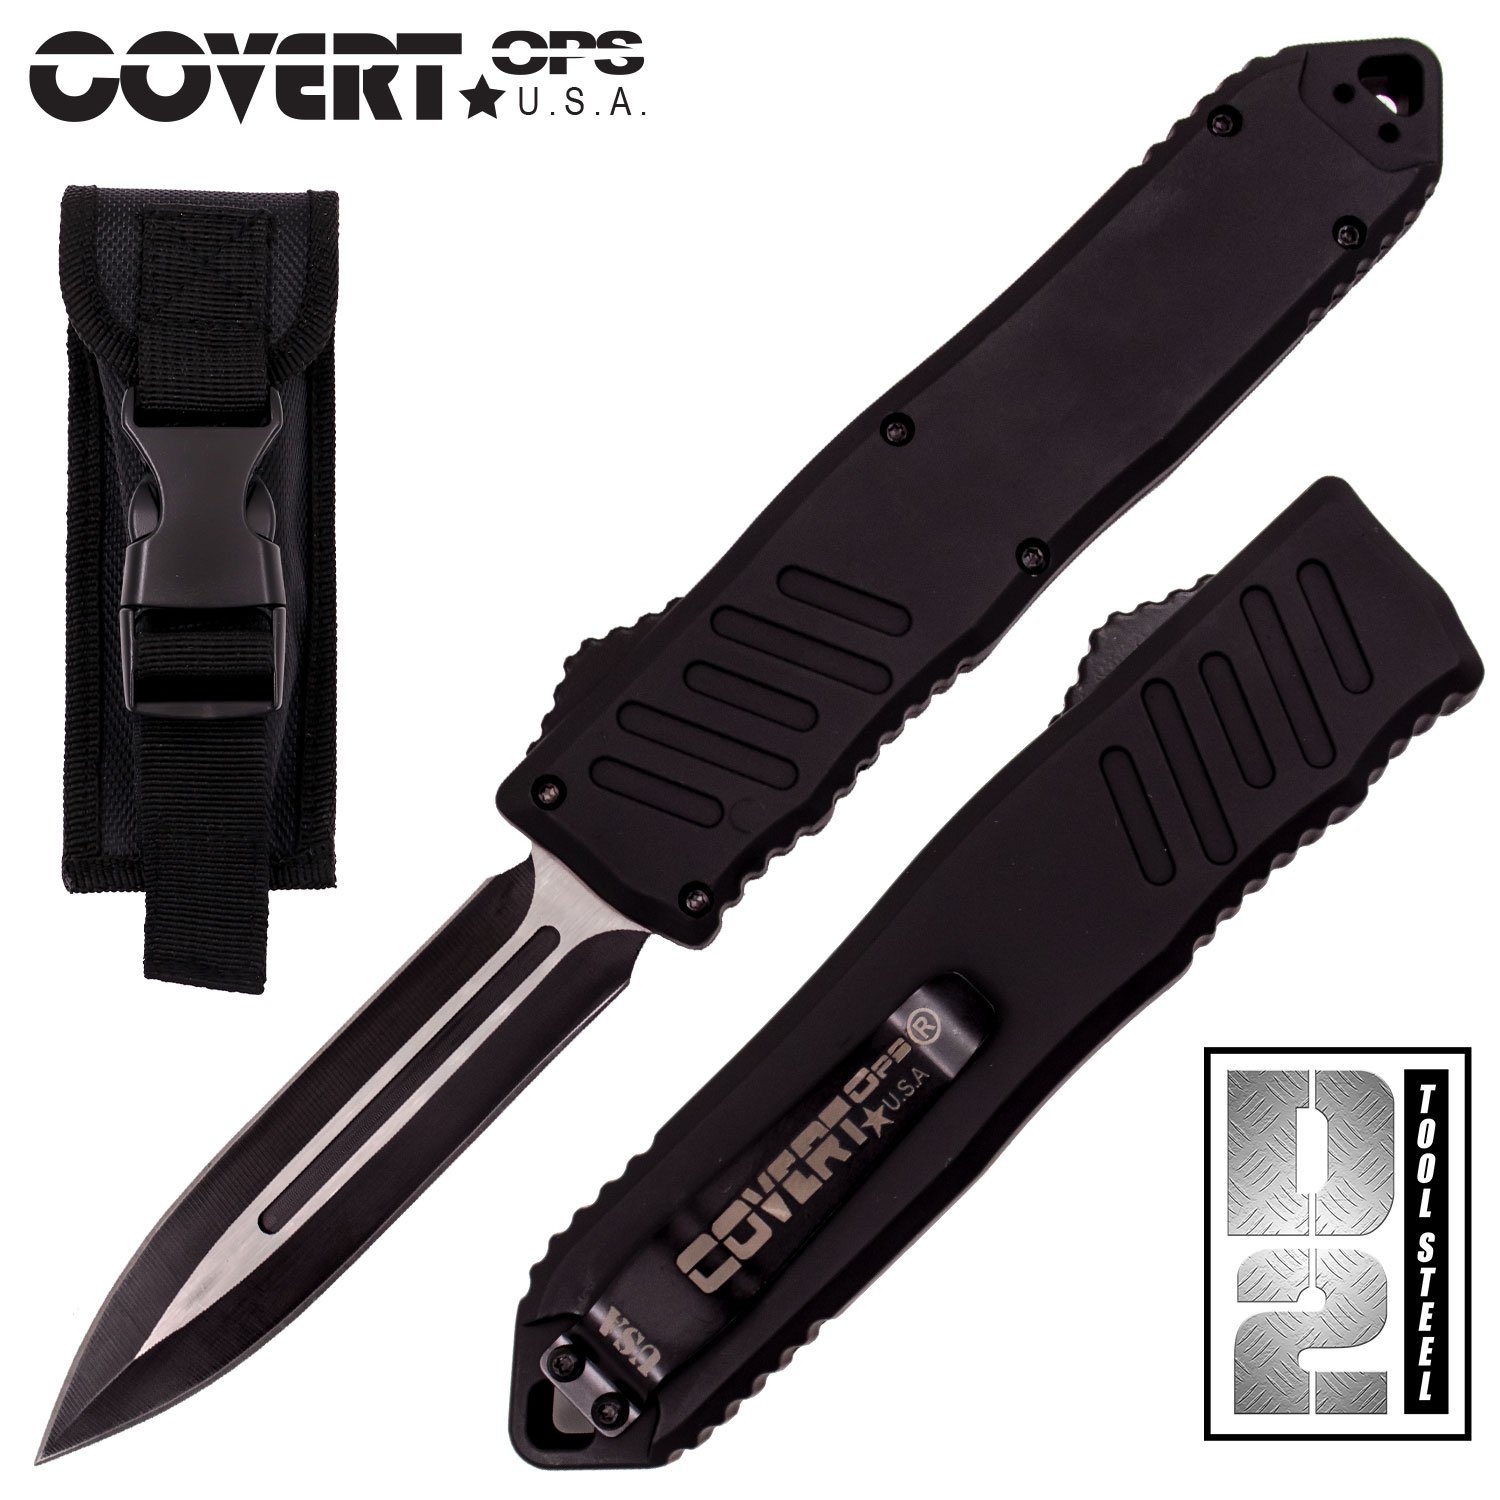 Covert OPS USA OTF Automatic Knife 9 inch Overall D2 Steel Blade DP